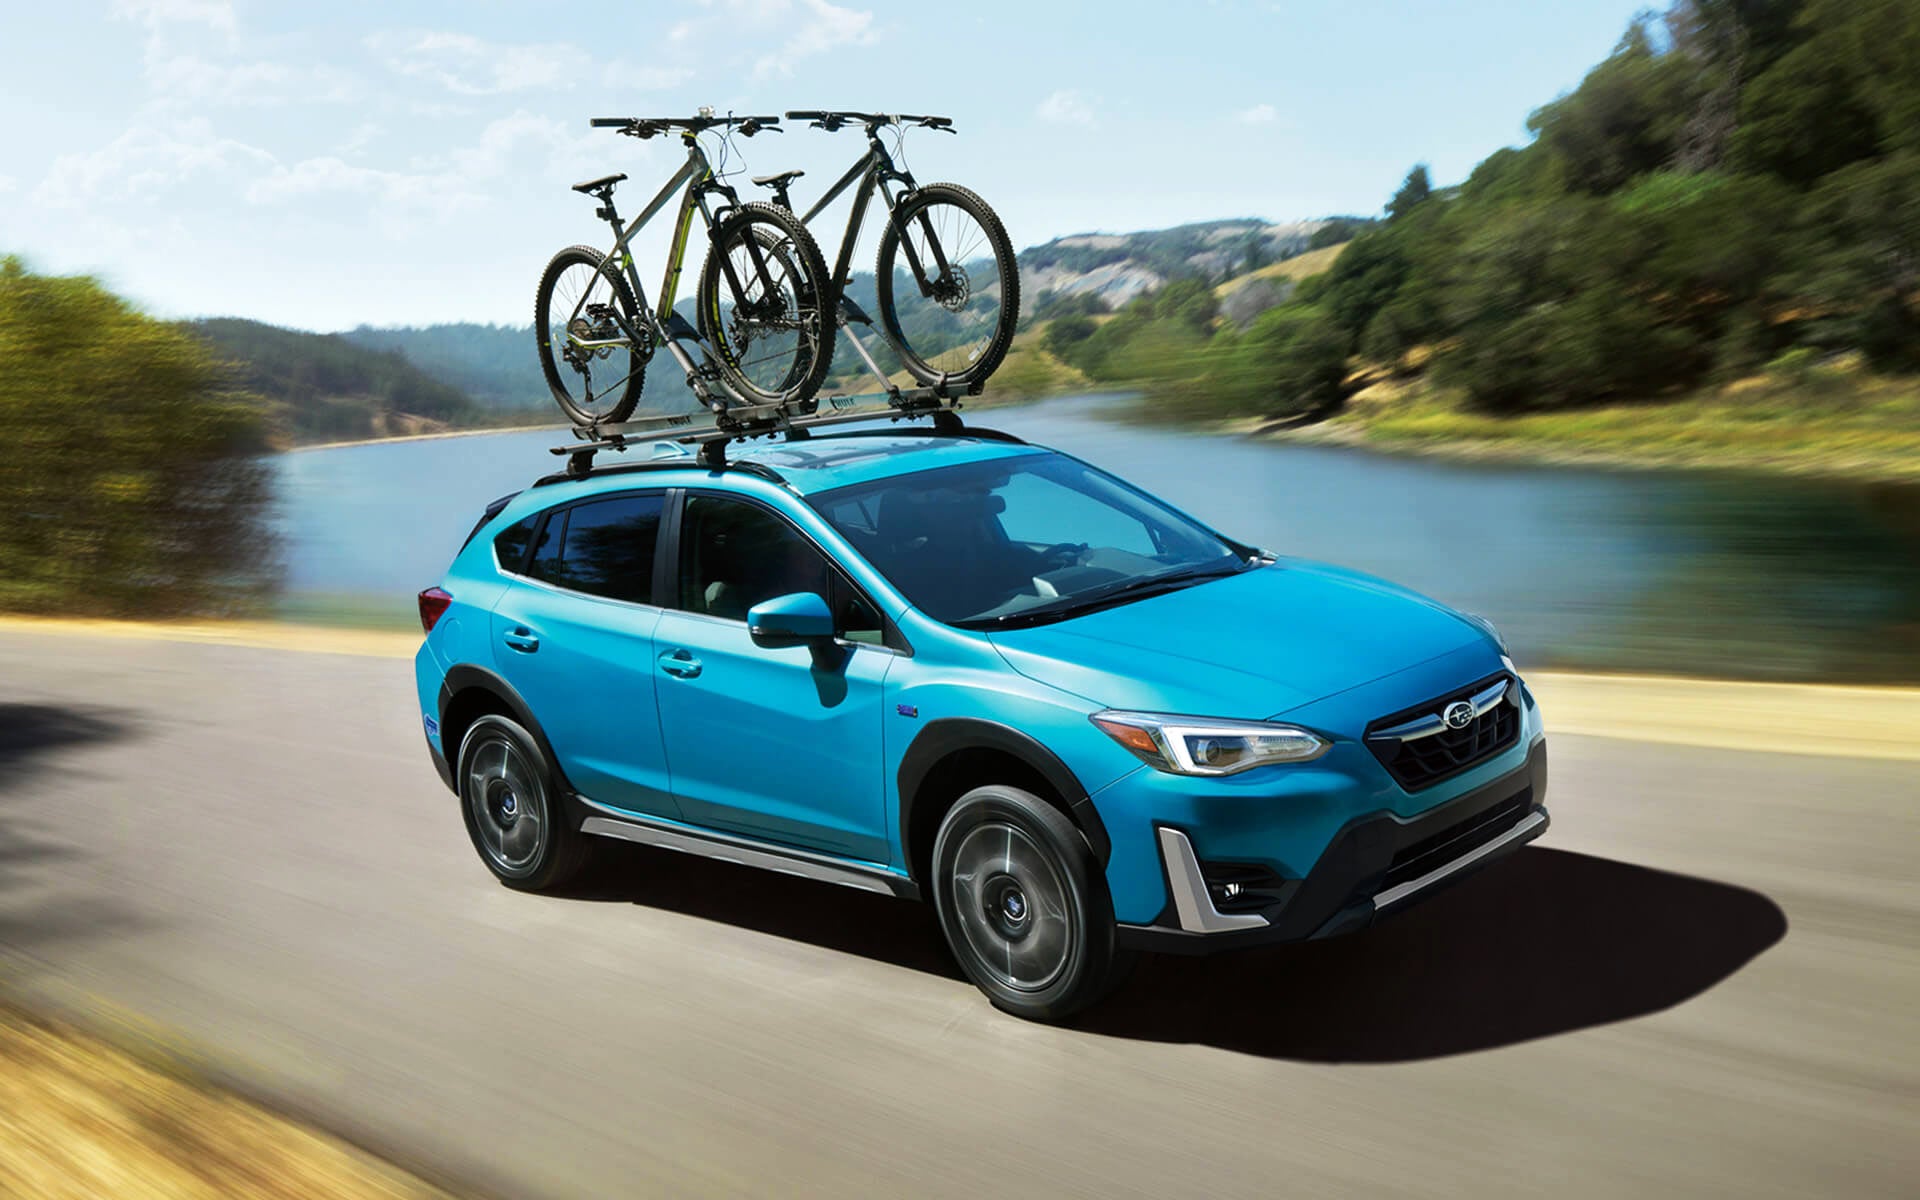 A blue Crosstrek Hybrid with two bicycles on its roof rack driving beside a river | Dalton Subaru in National City CA